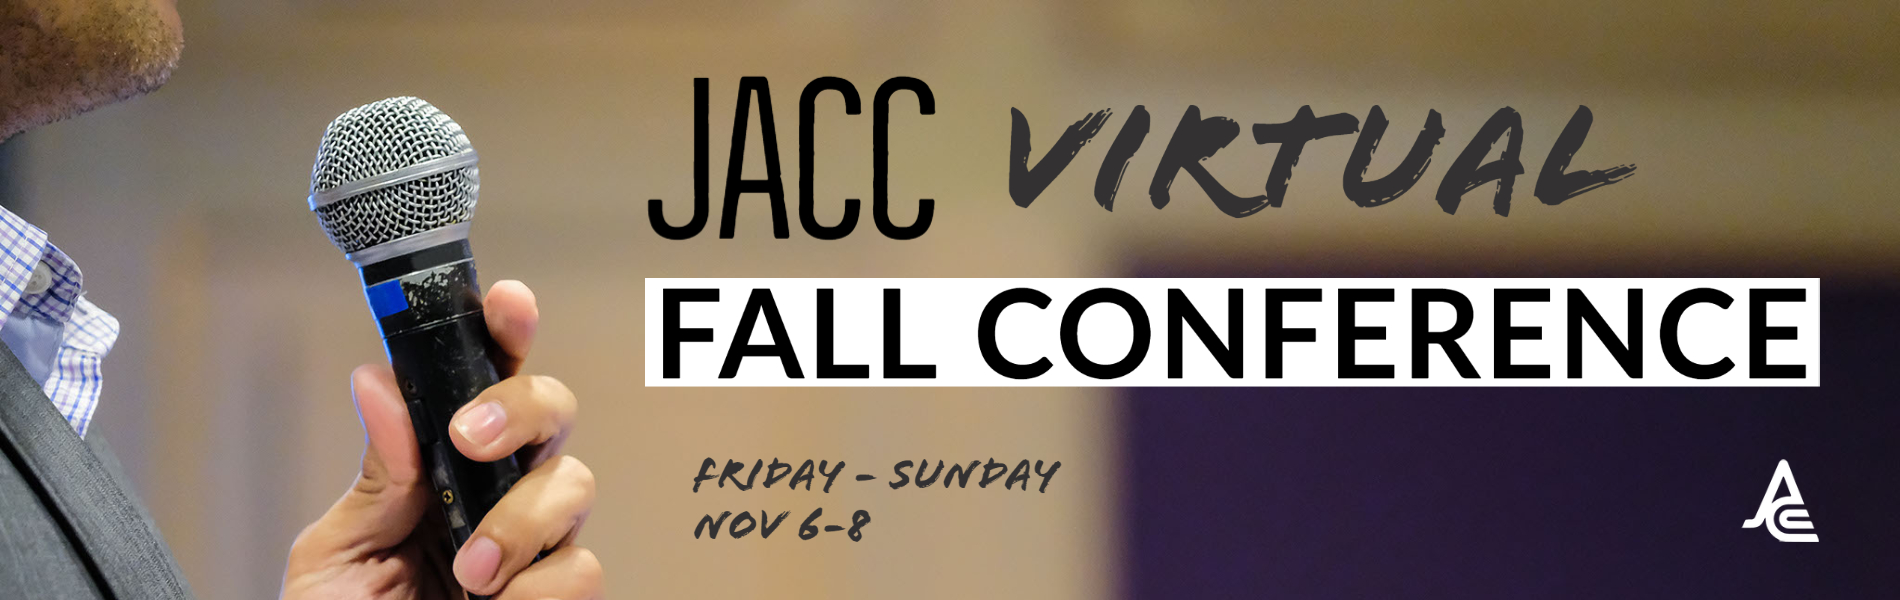 JACC Virtual Fall Conference